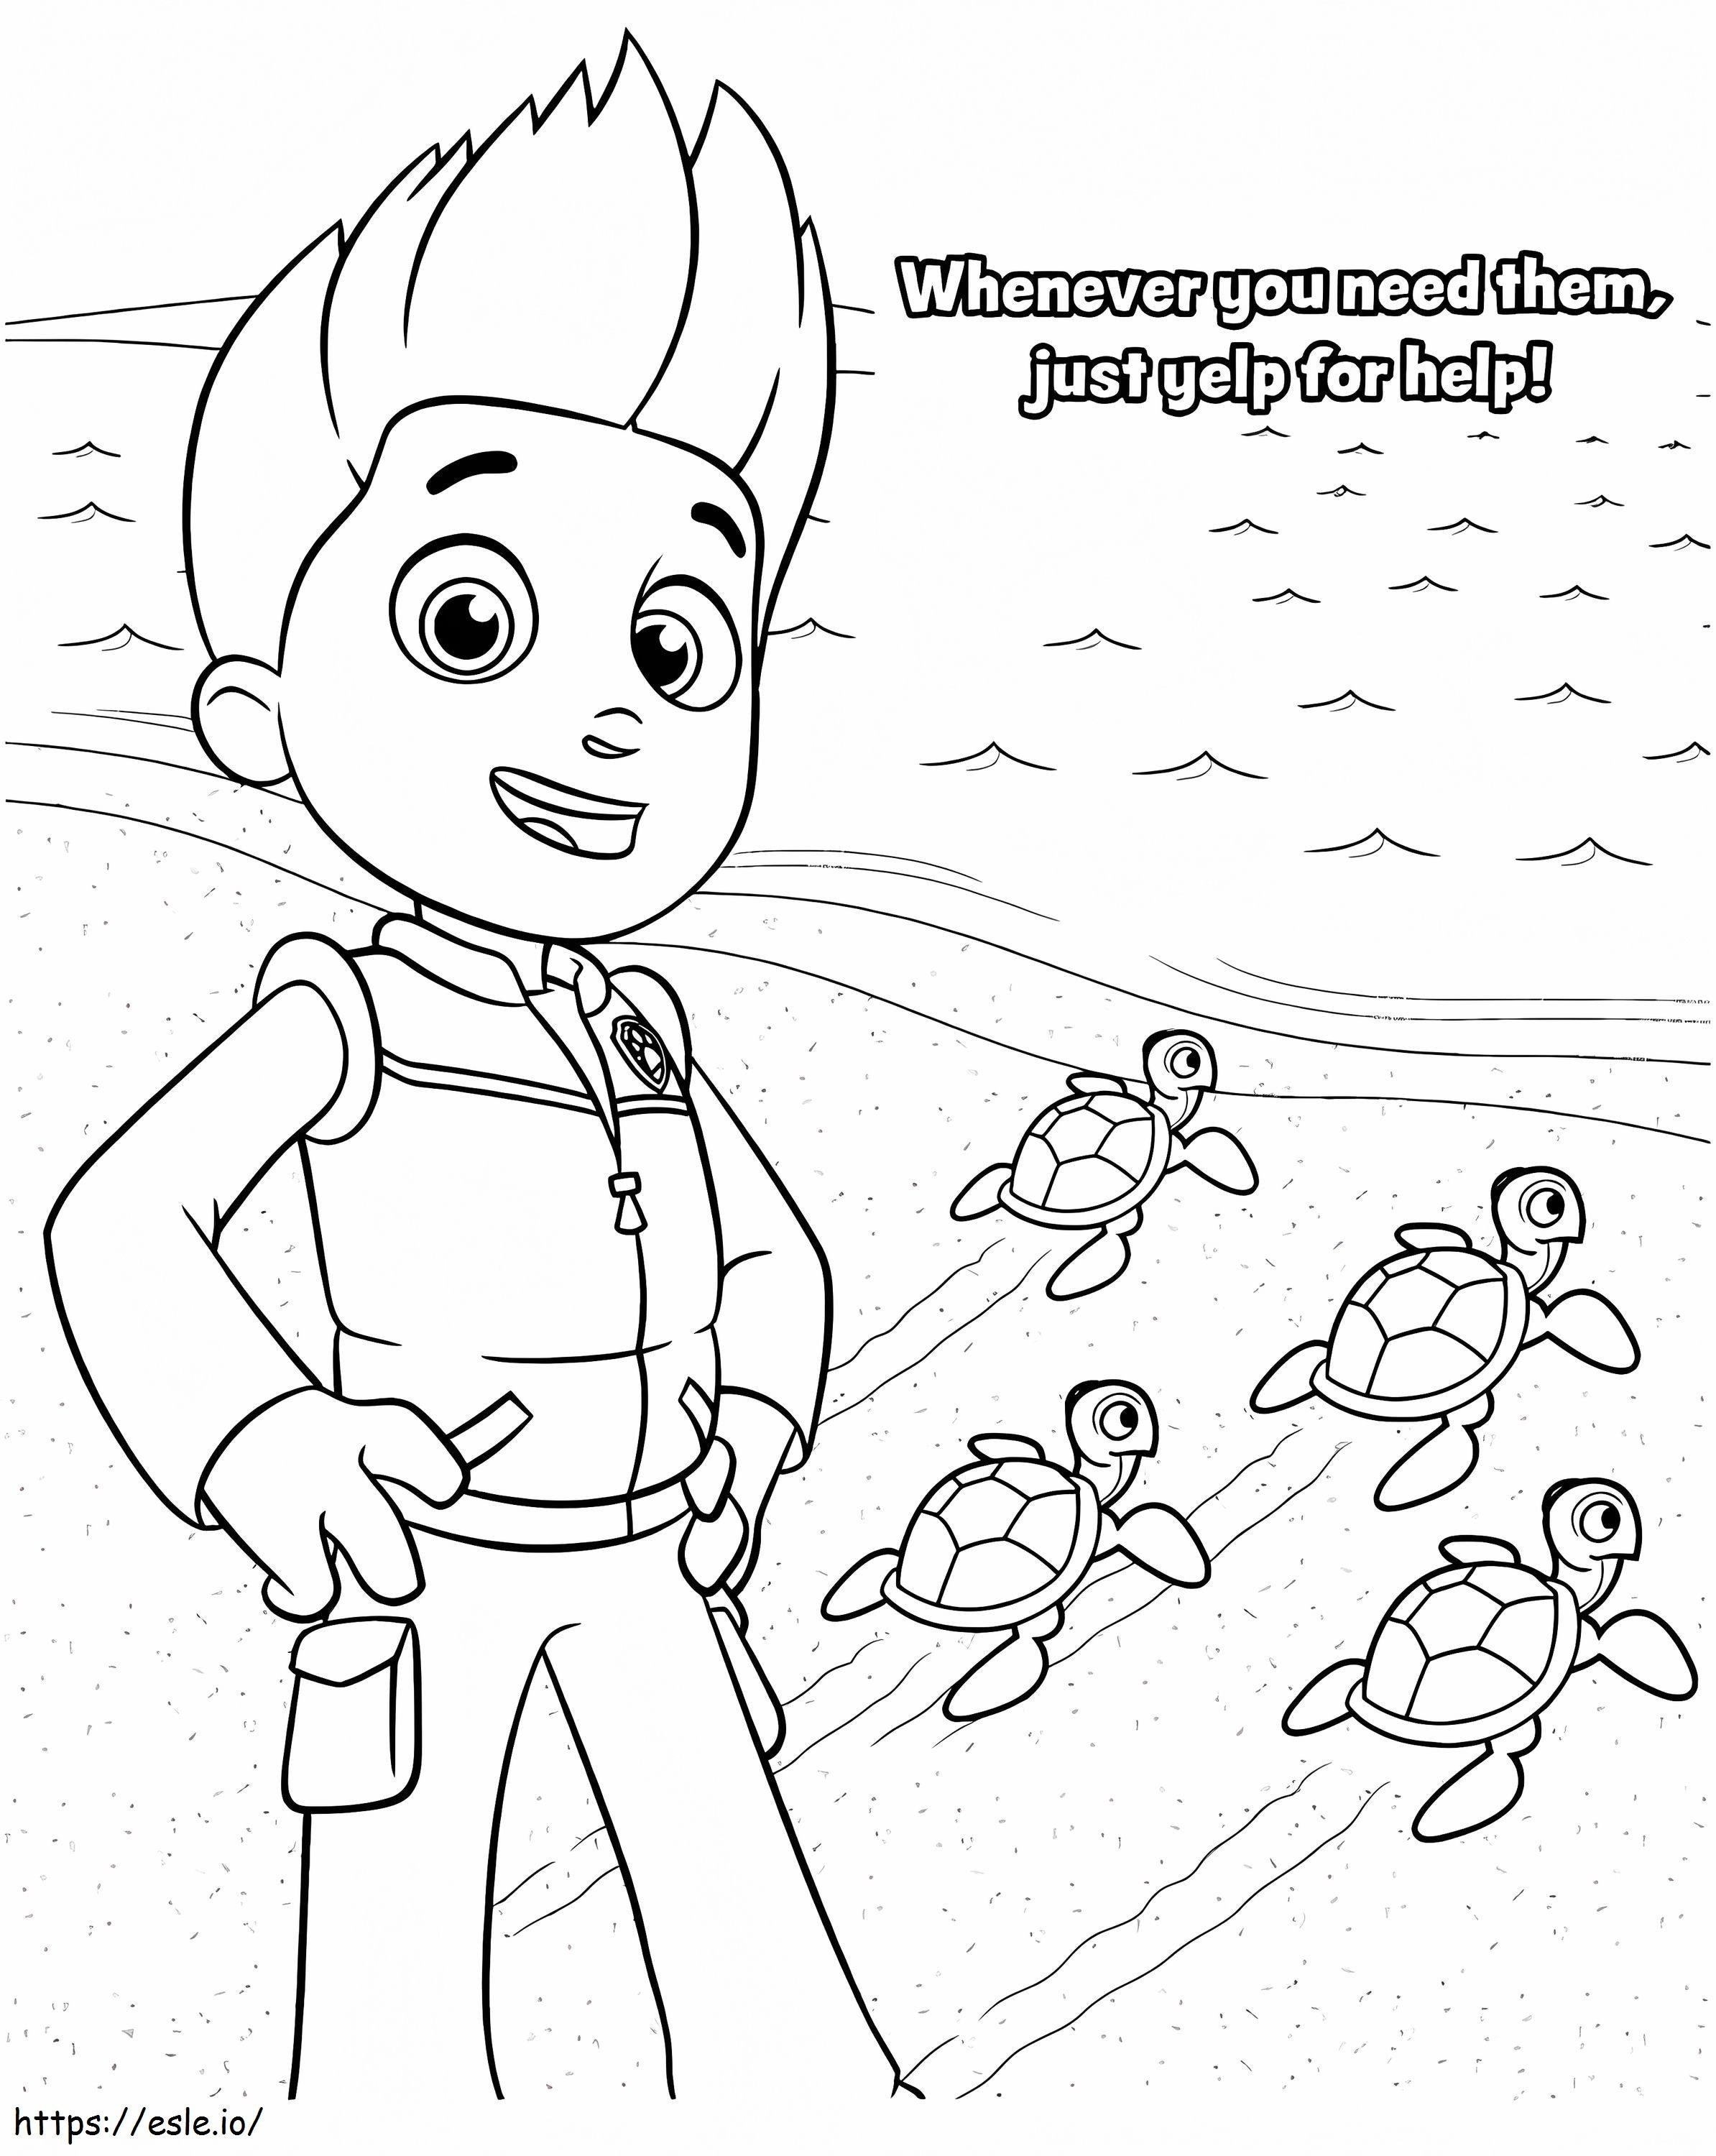 Ryder And Turtles coloring page